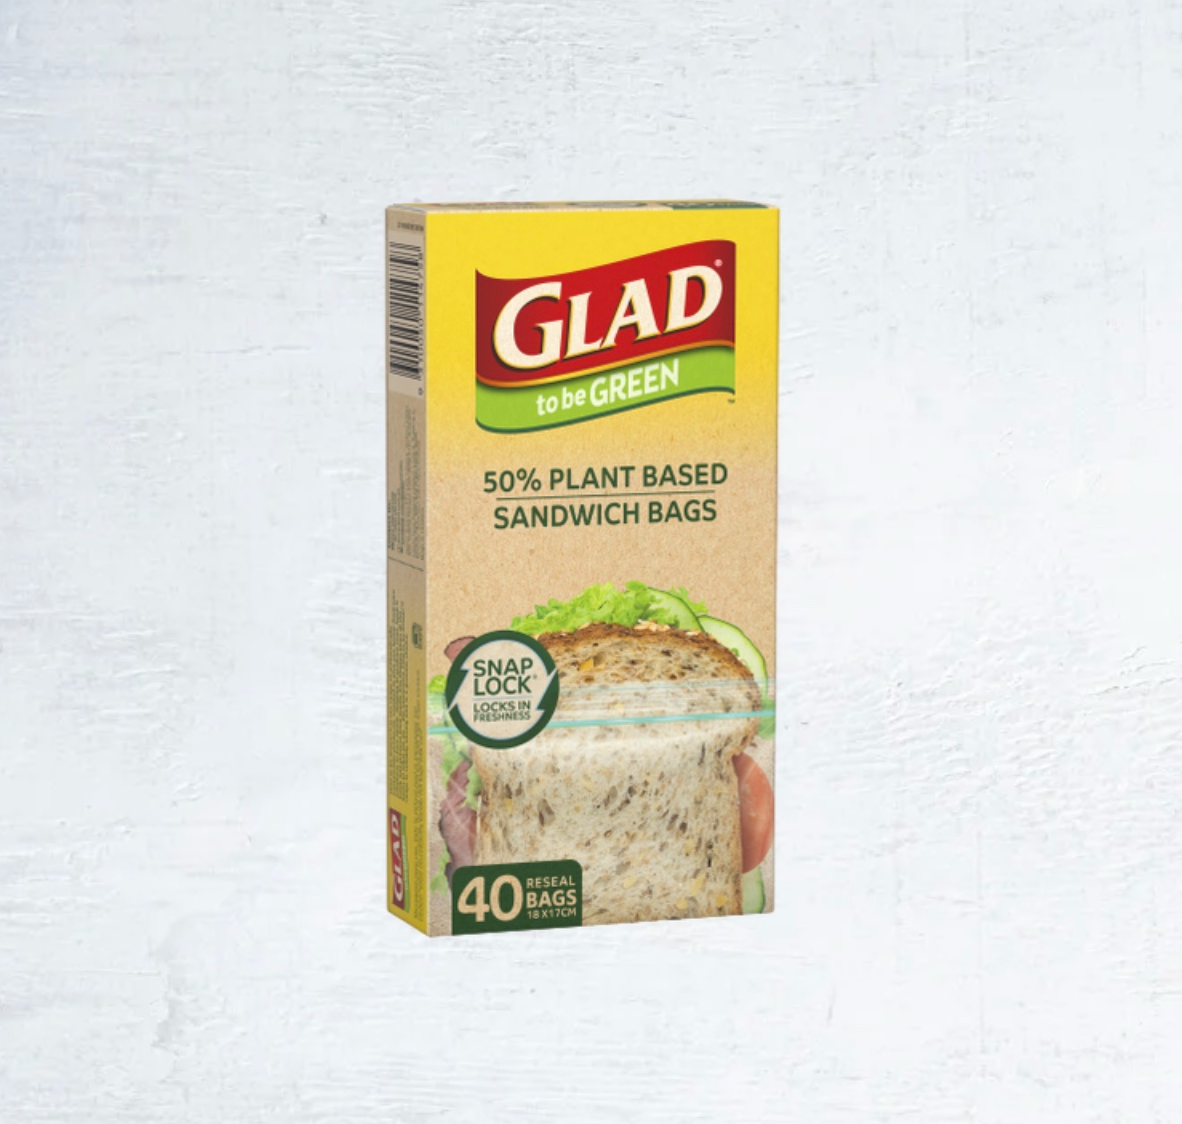 Glad to be Green® 50% Plant Based Reseal Bag – Sandwich Logo